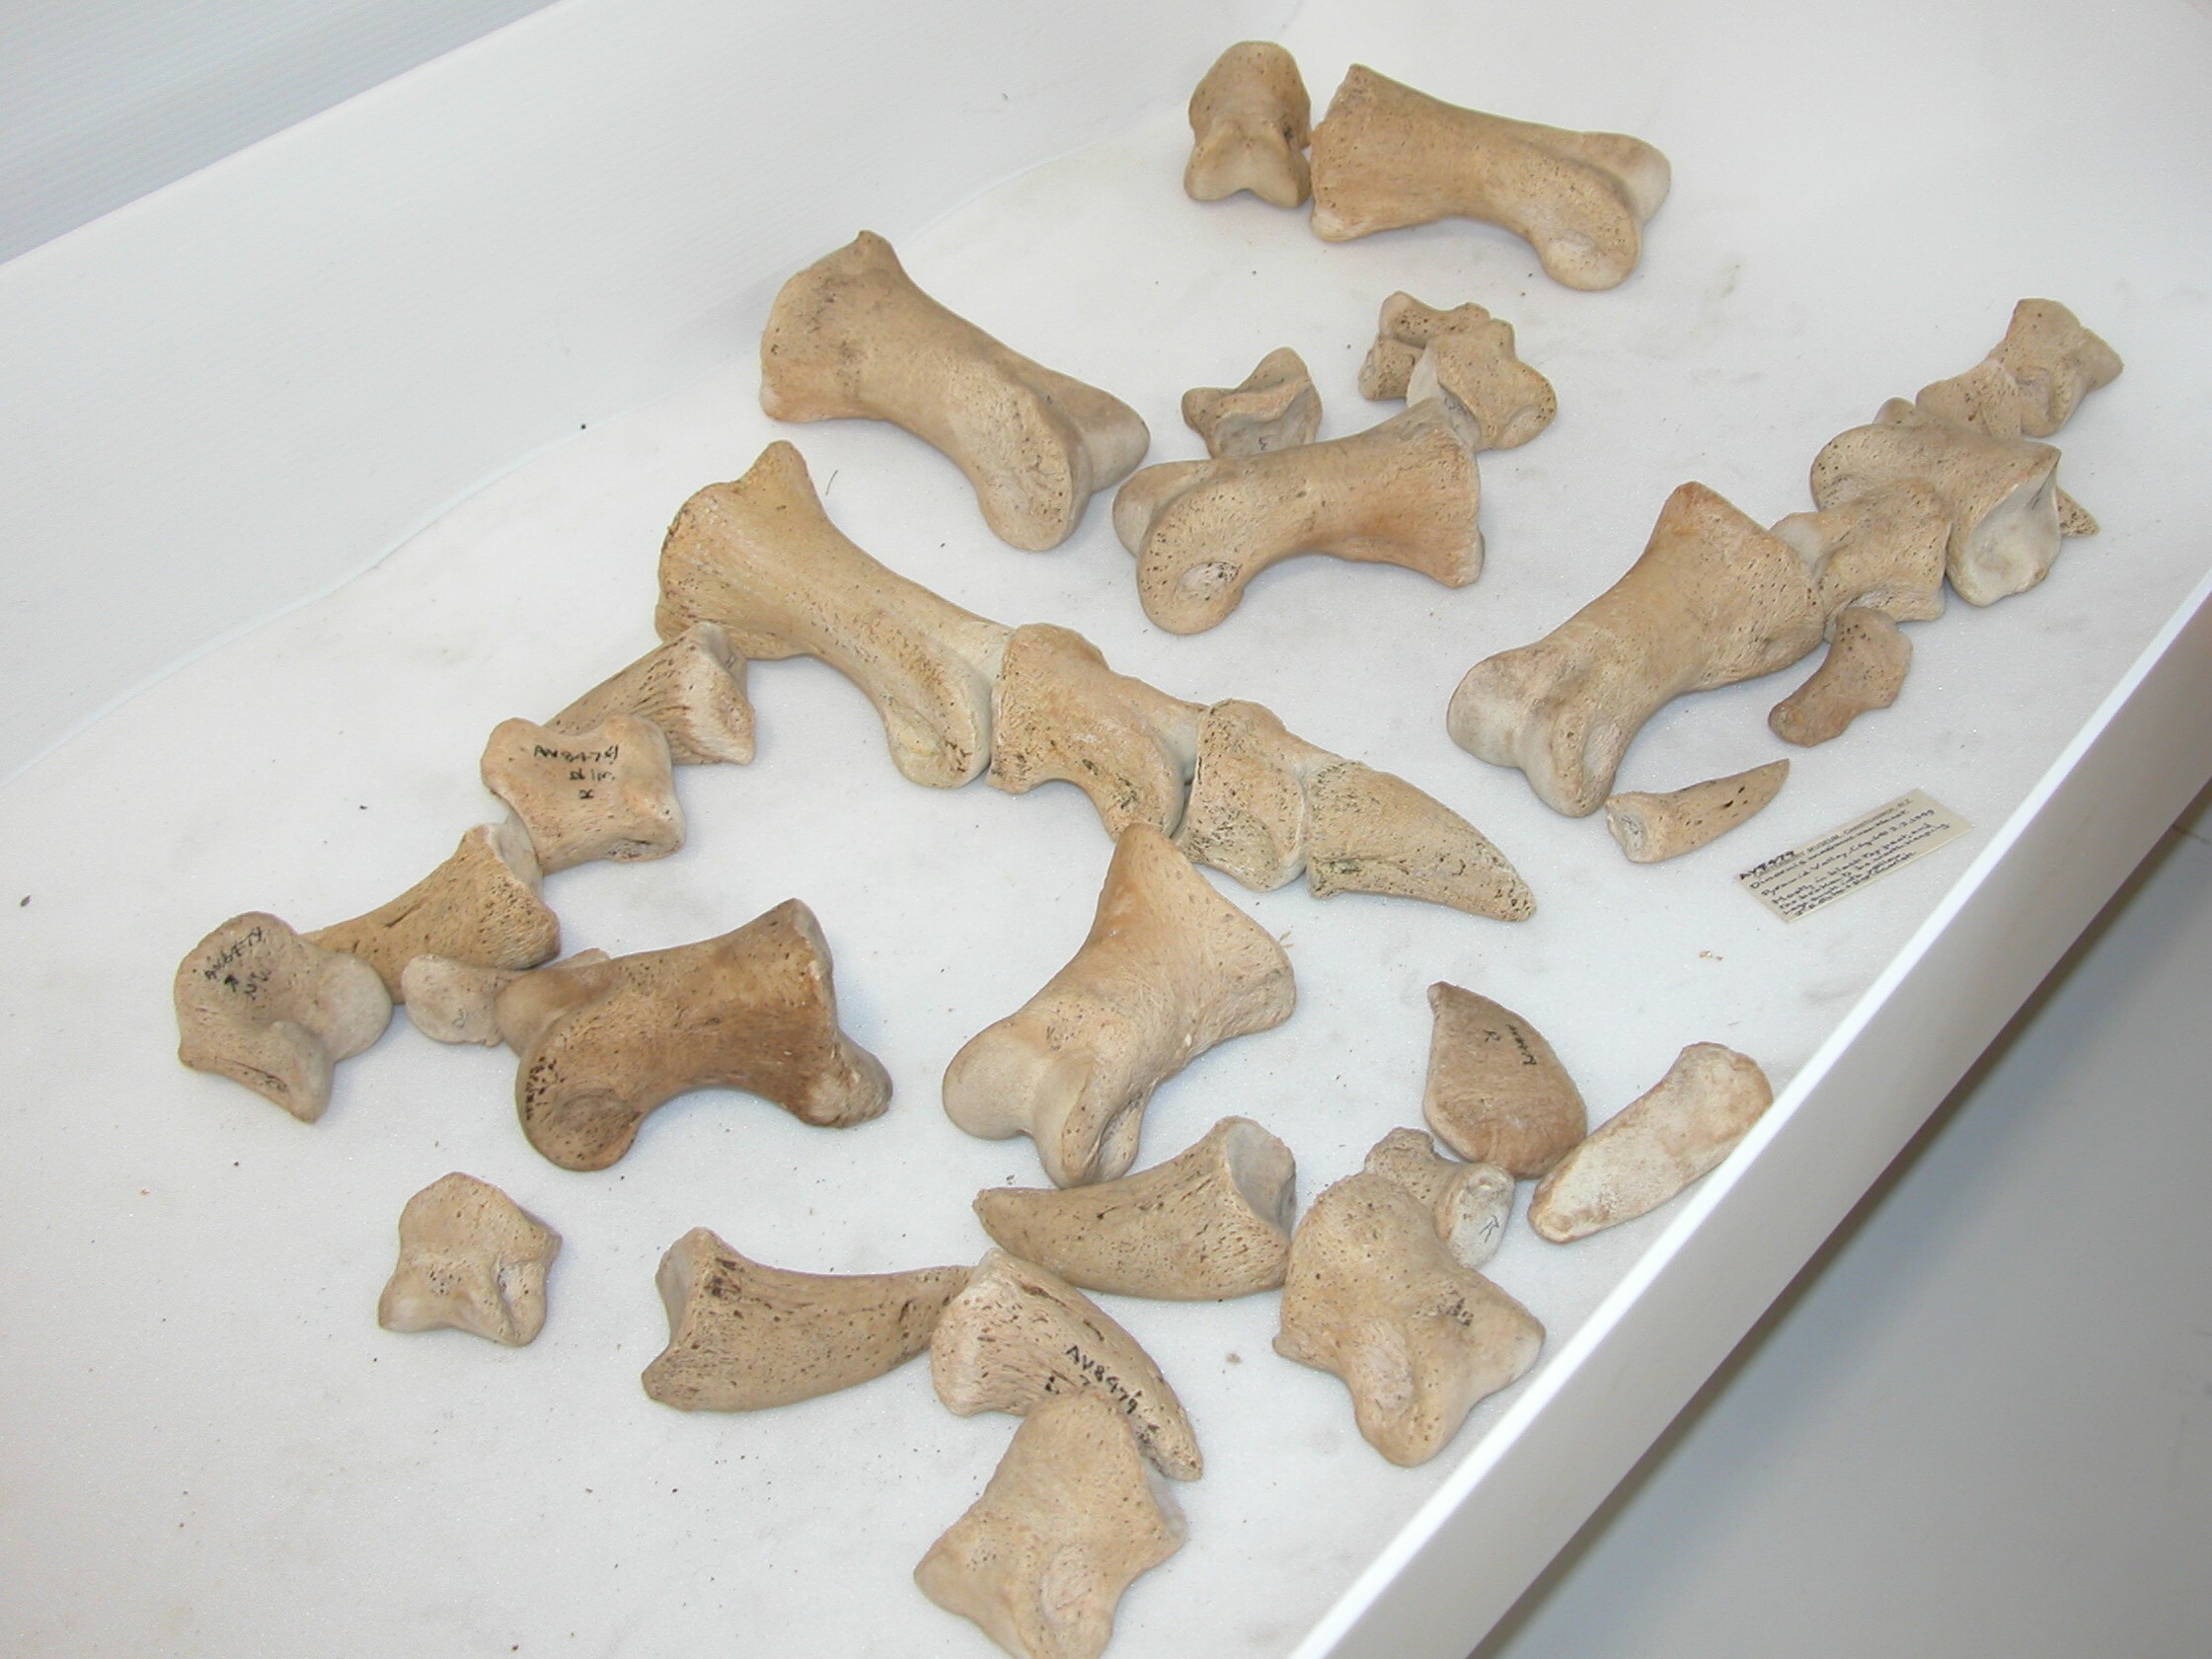 Some of these moa bones are casts but others are originals. Can you spot the difference?